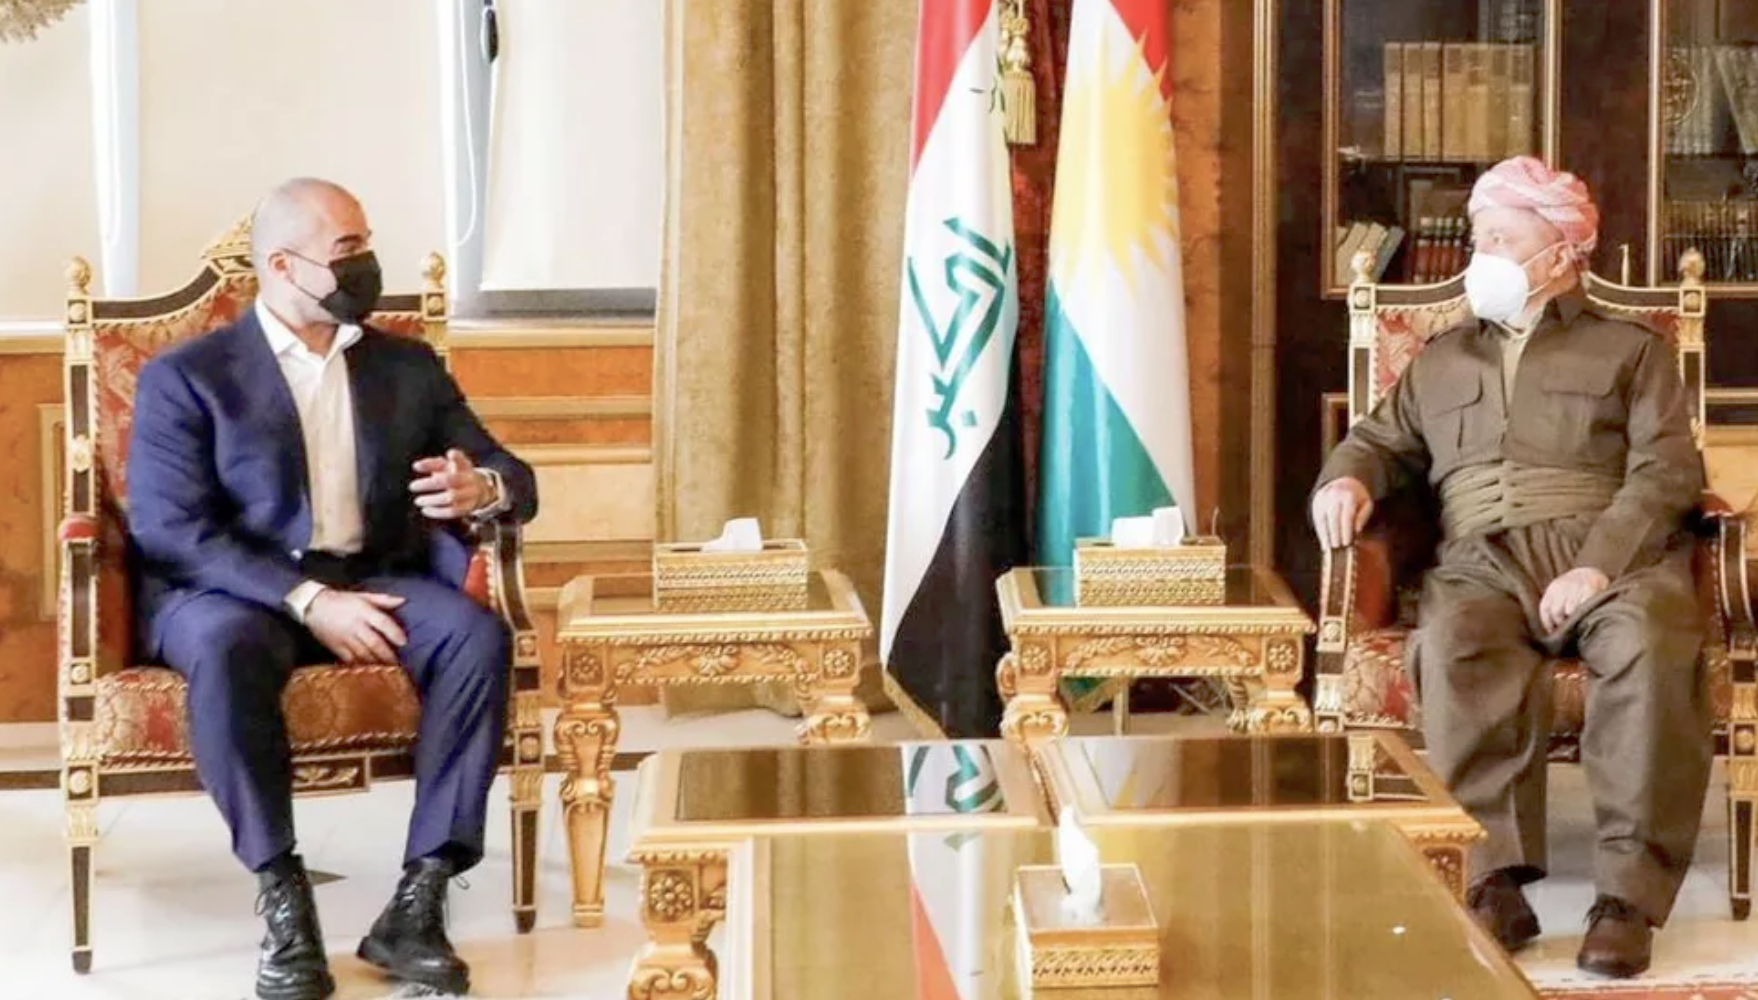 The two Kurdish poles meet to resolve the question of the next Iraqi President